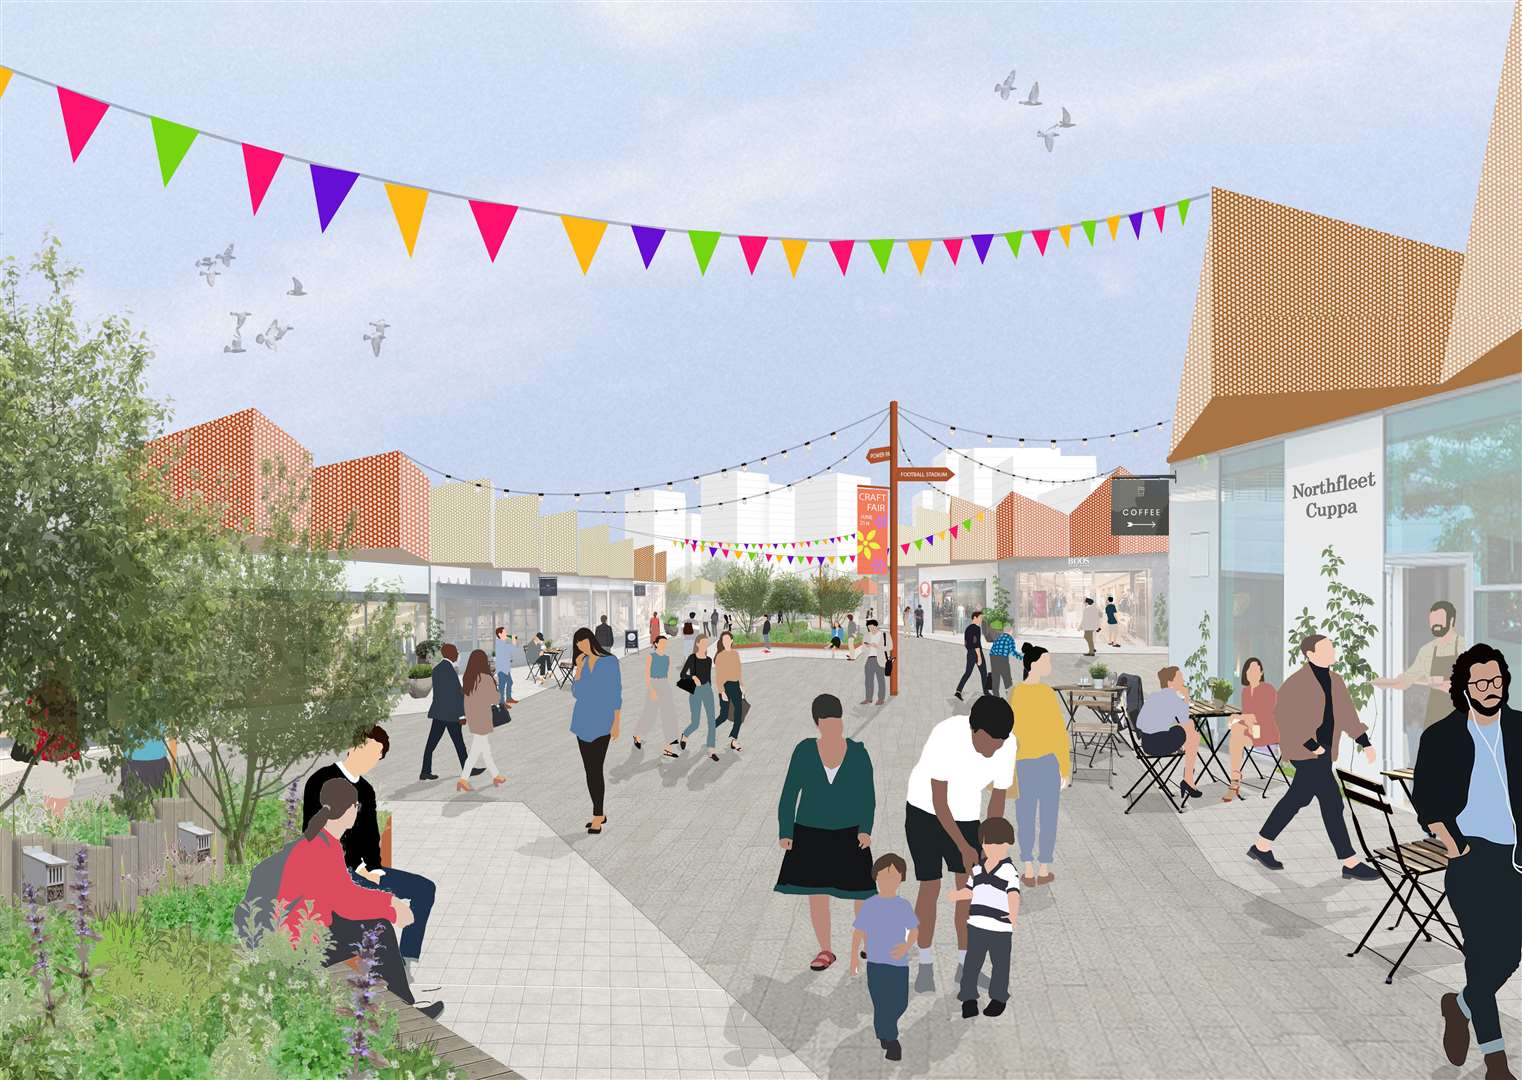 Plans feature a new retail village consisting of 225,000 sq ft of shops, restaurants, bars and cafes. Photo: Northfleet Harbourside